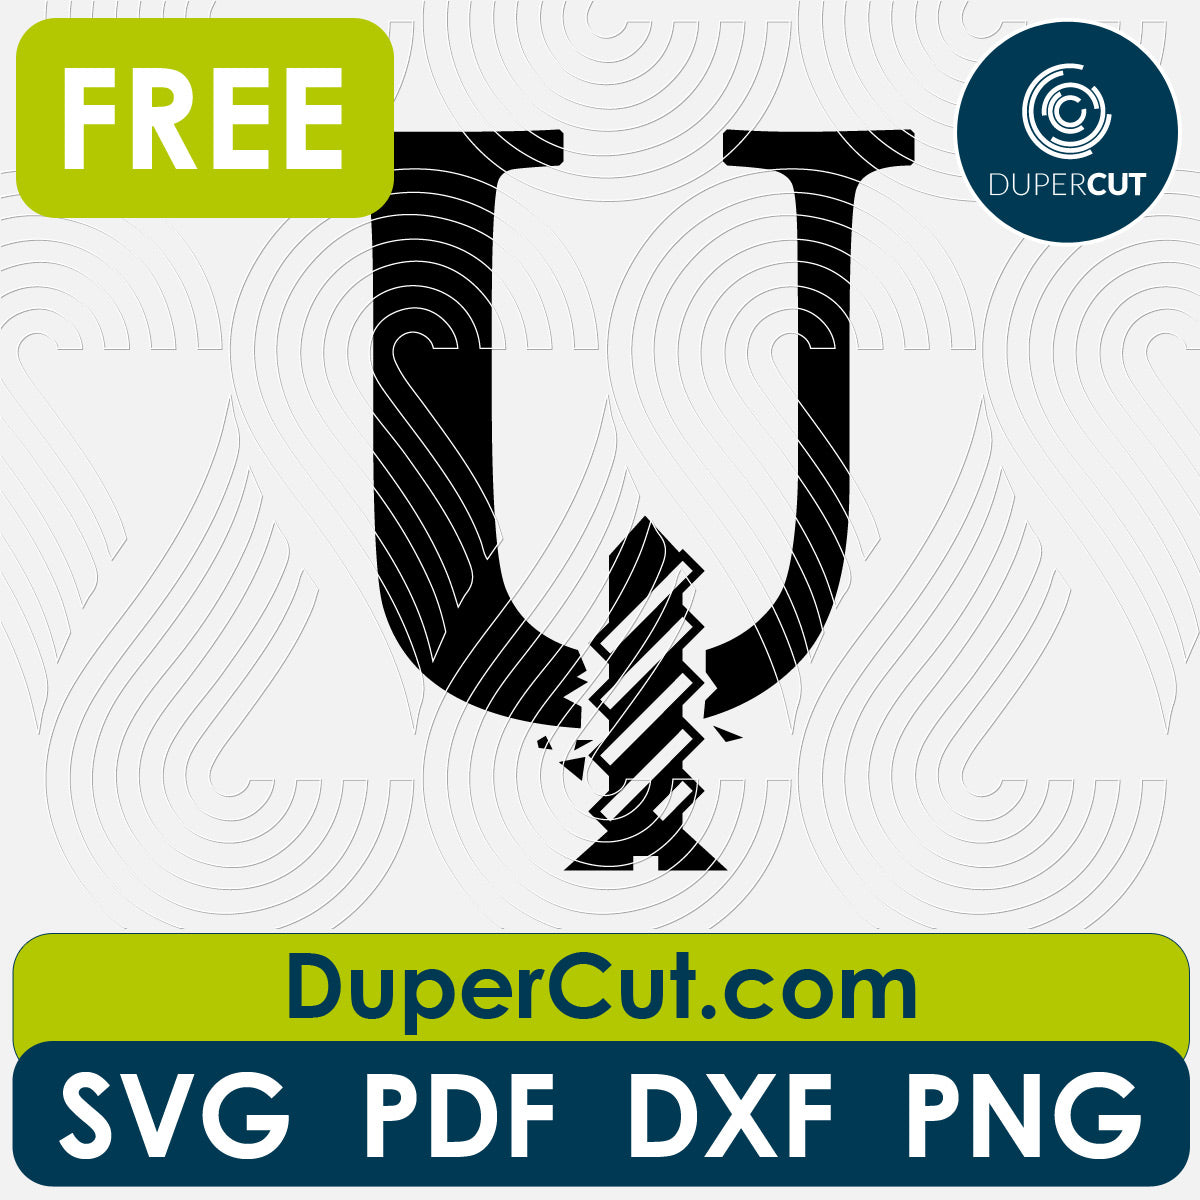 Screw U - free SVG PNG DXF vector files for laser and blade cutting machines. Glowforge, Cricut, Silhouette cameo templates by www.DuperCut.com